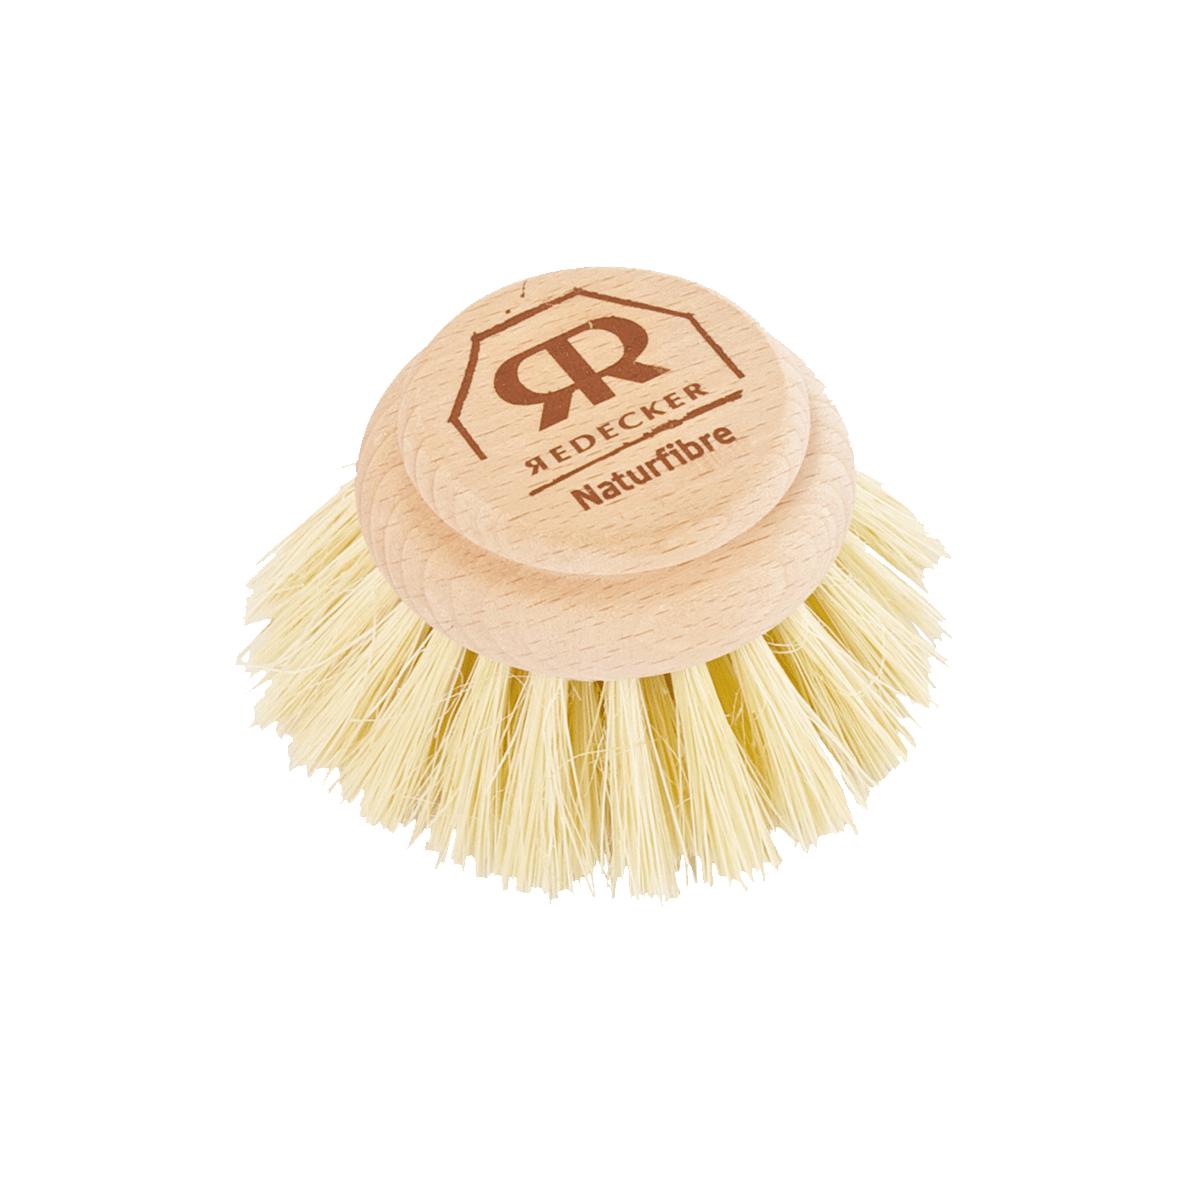 Redecker Tampico Fiber Cleaning Brush Replacement Head